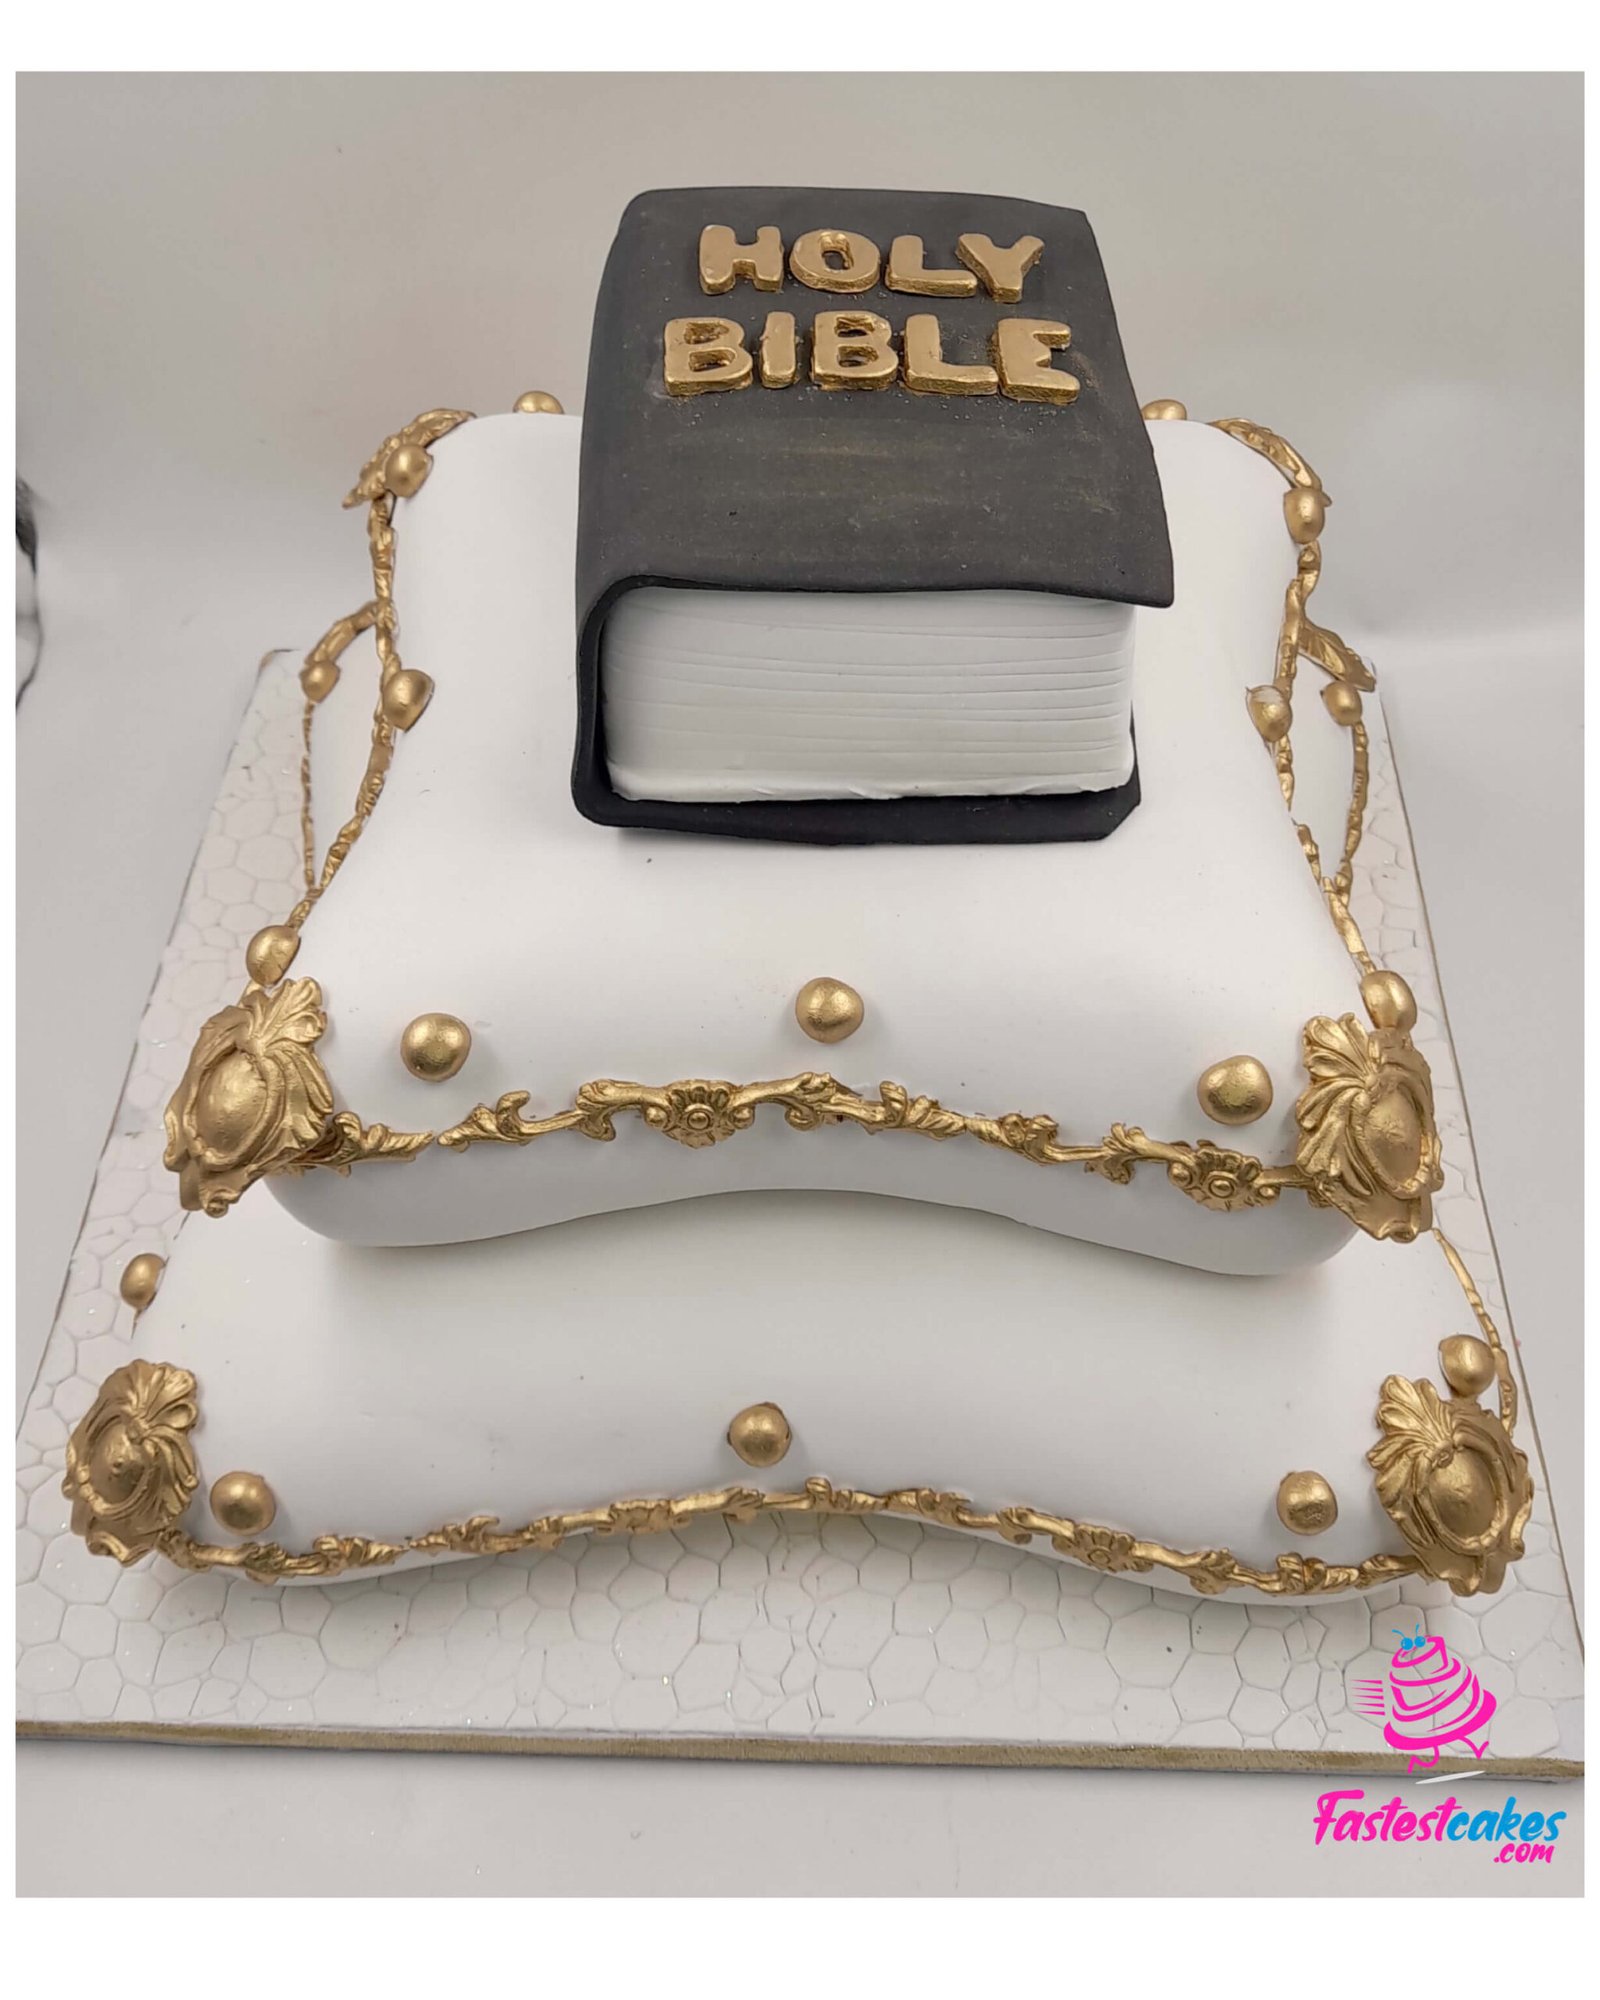 jewellery box Archives | Outrageous Cakes